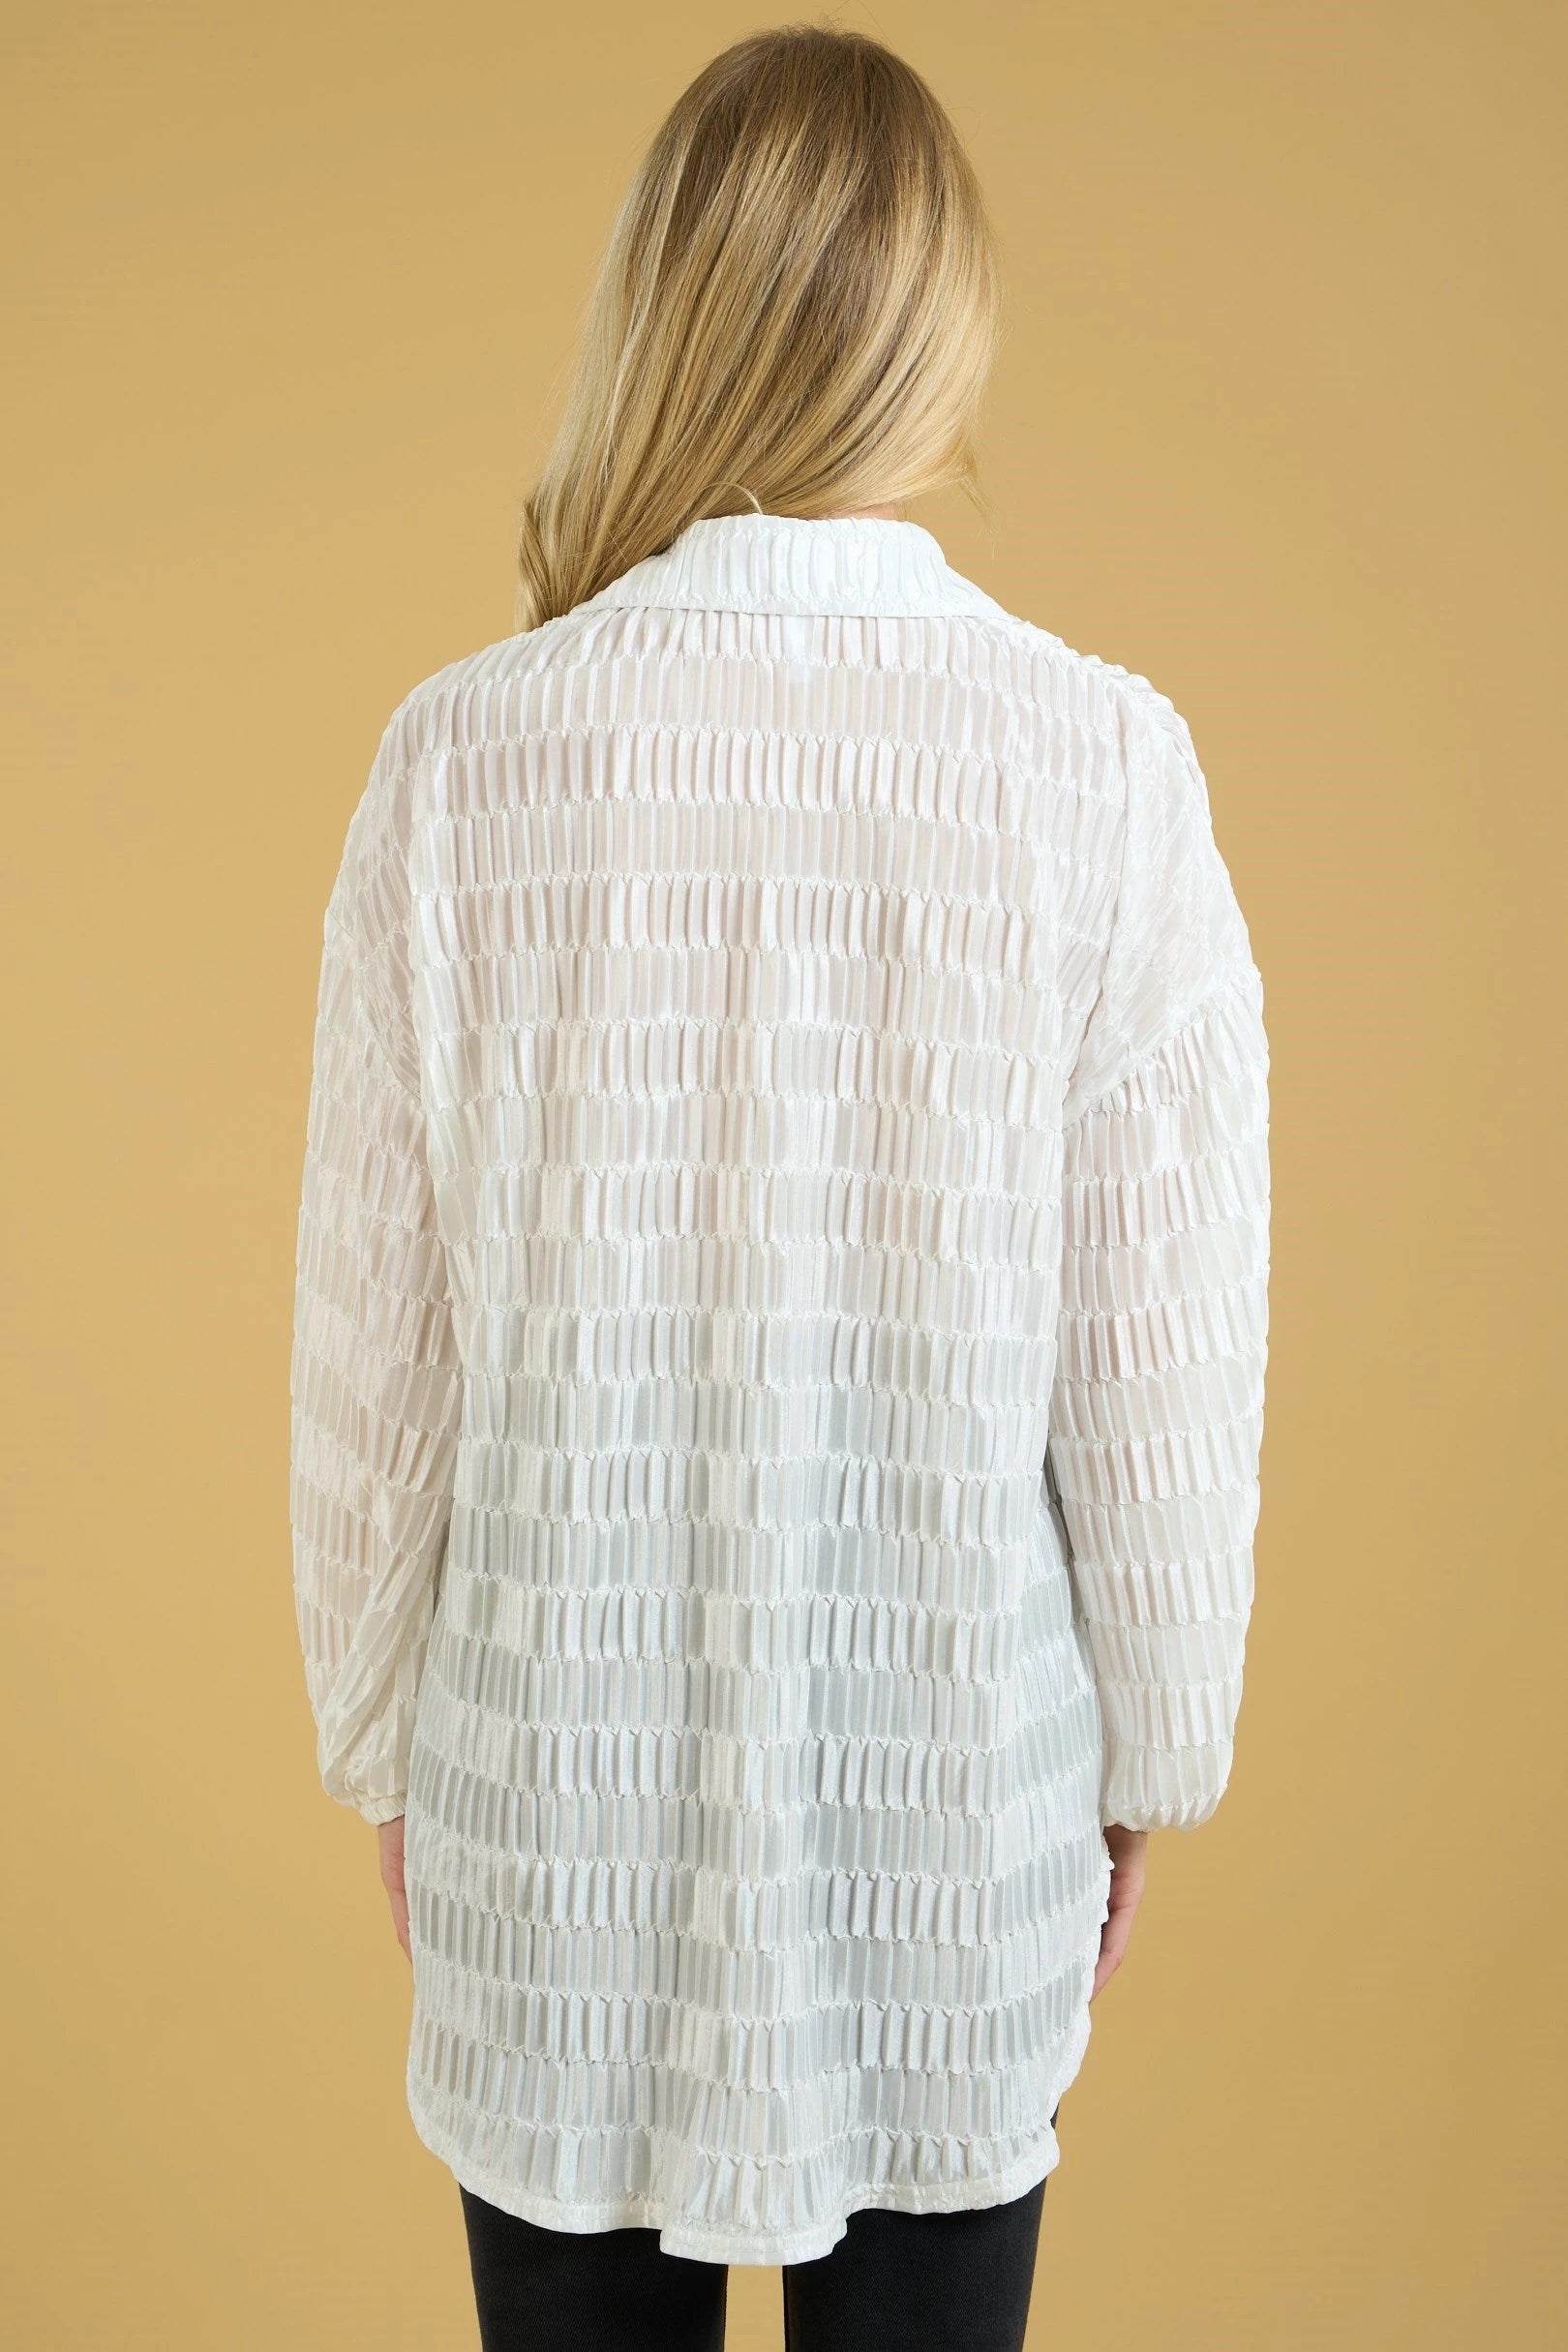 White textured oversized button down top with drop shoulder, high low hem, long sleeves, and elastic cuff.